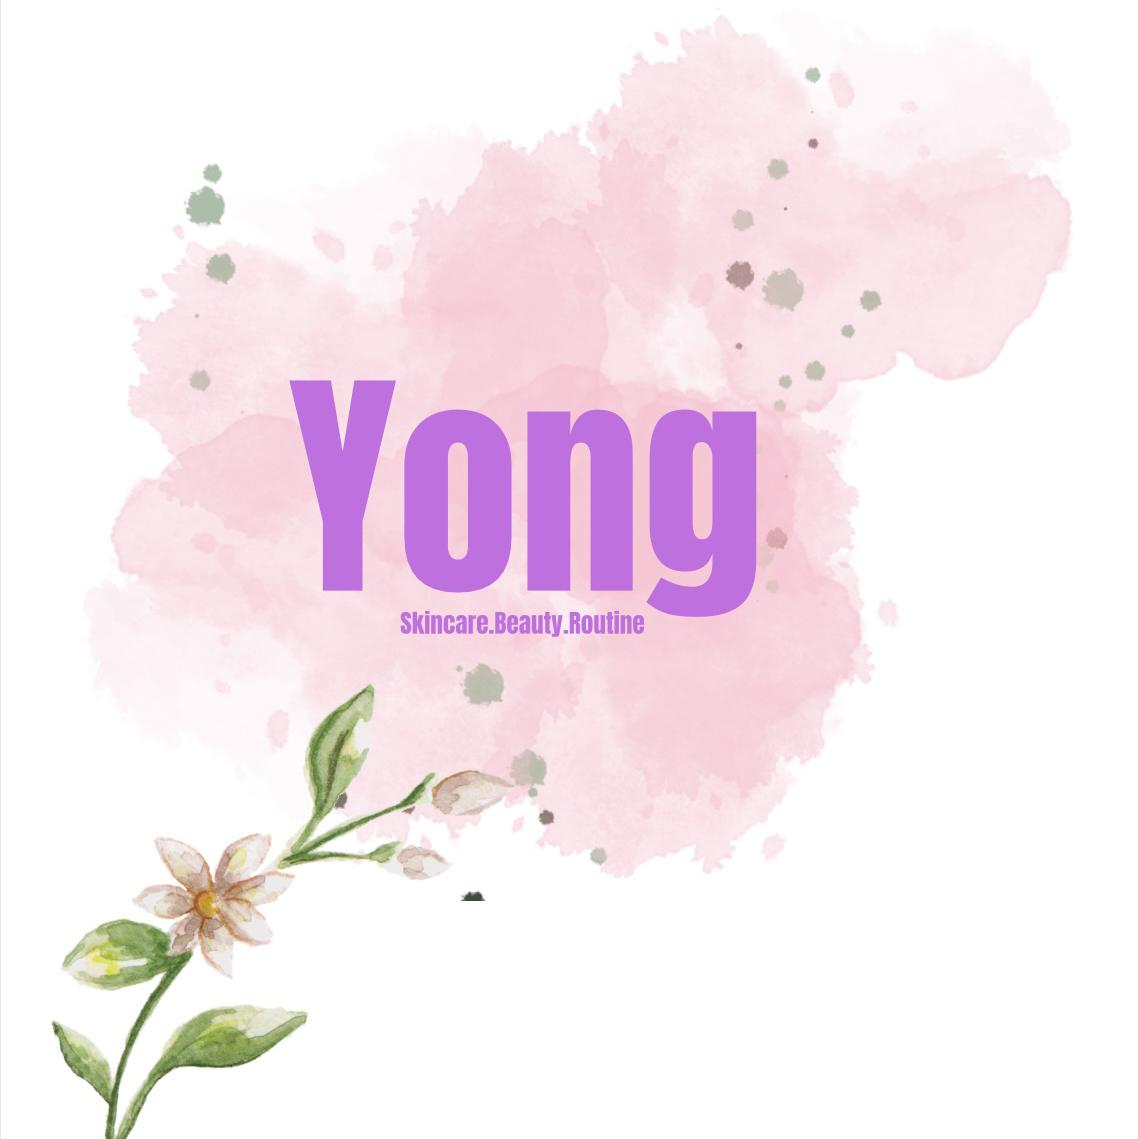 Yongskincare's images